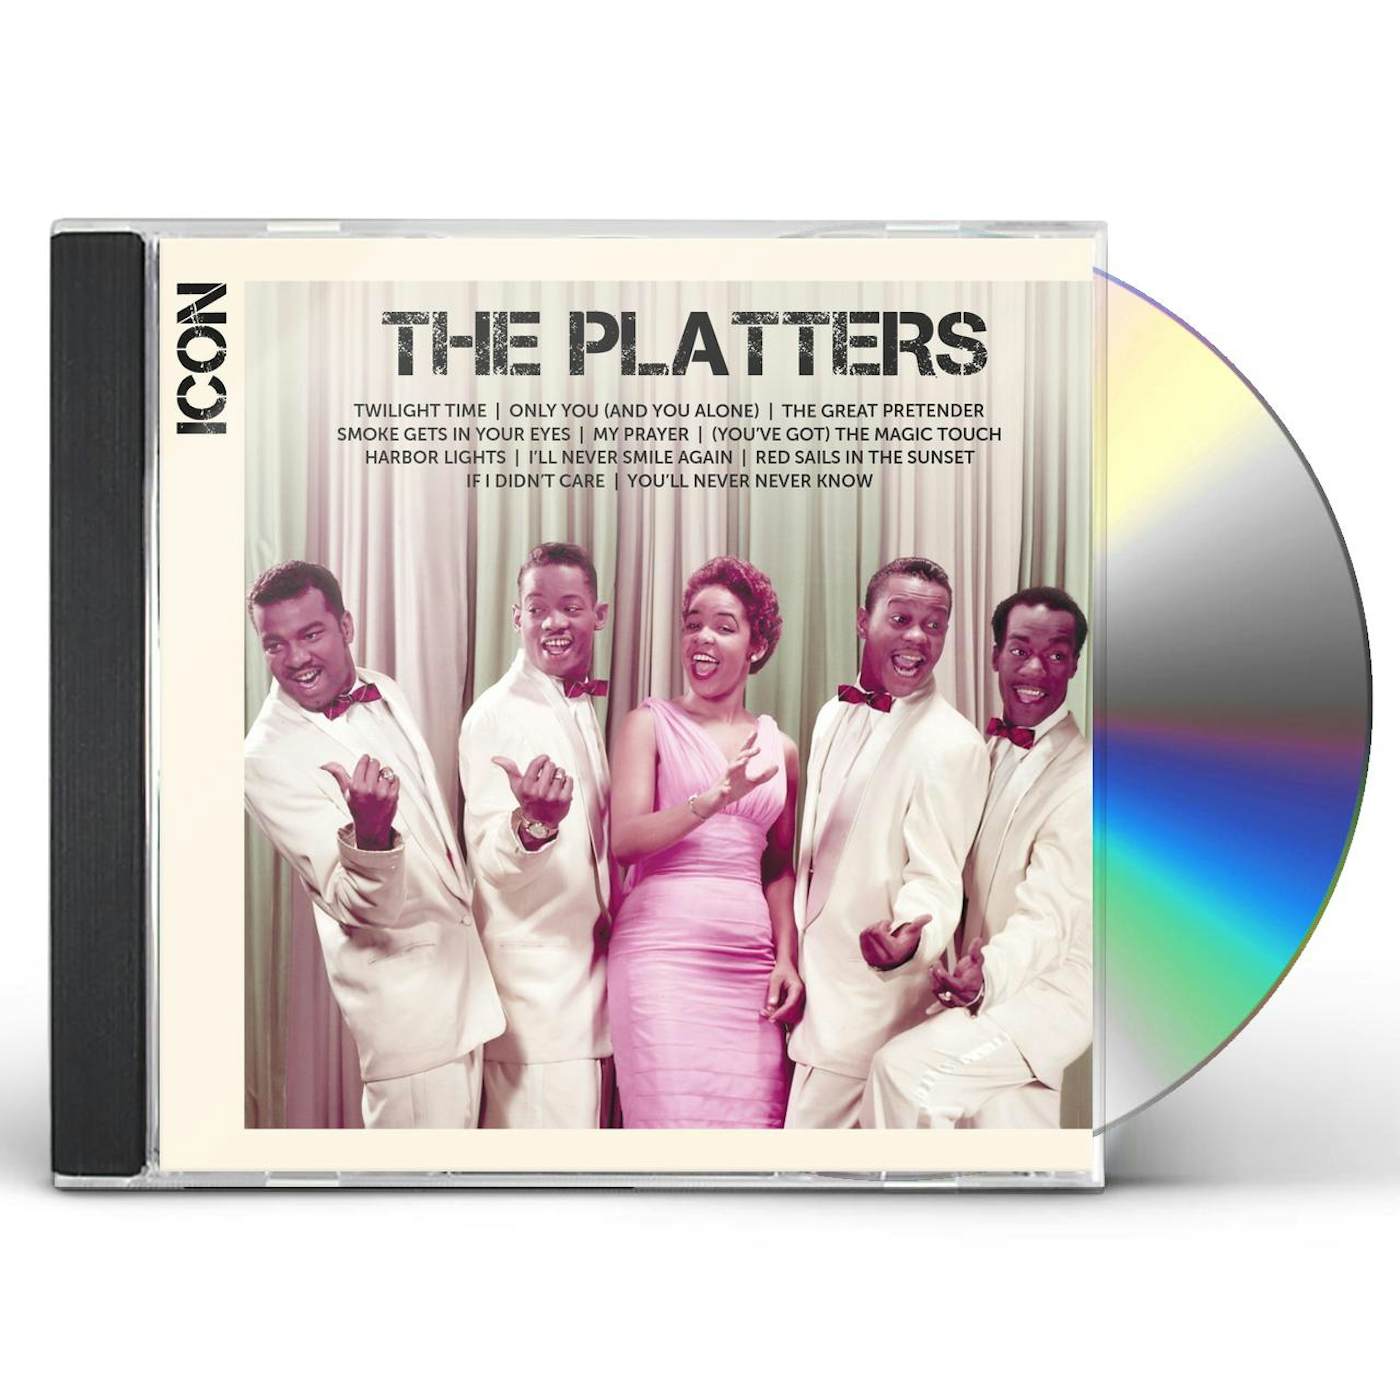 The Platters ICON CD